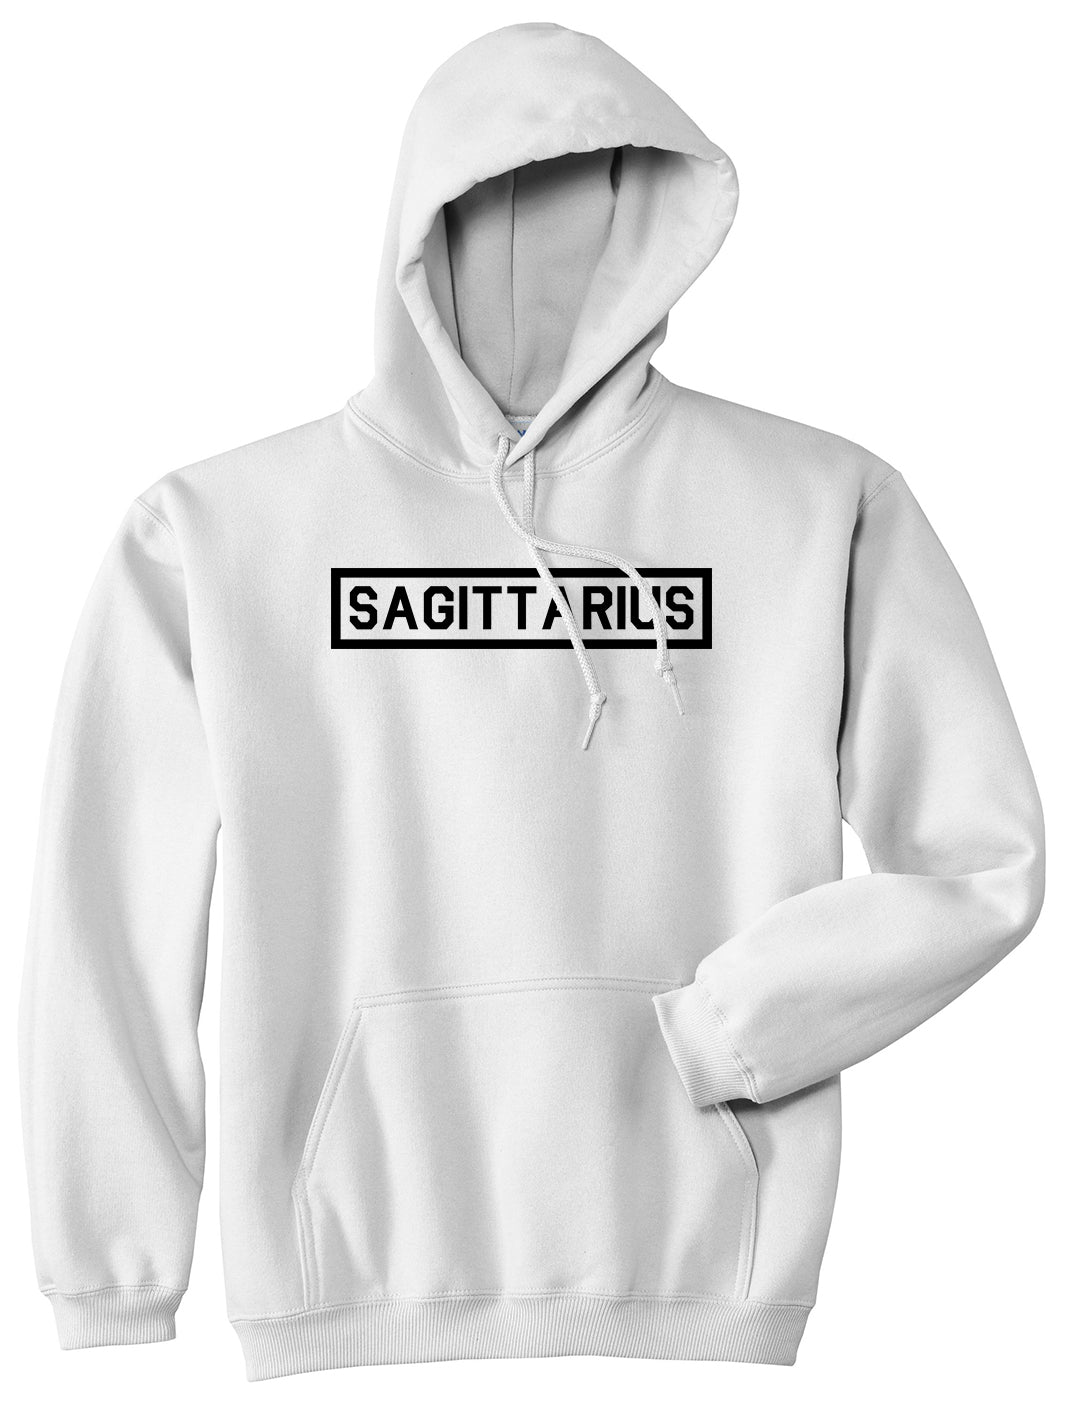 Sagittarius Horoscope Sign Mens White Pullover Hoodie by KINGS OF NY